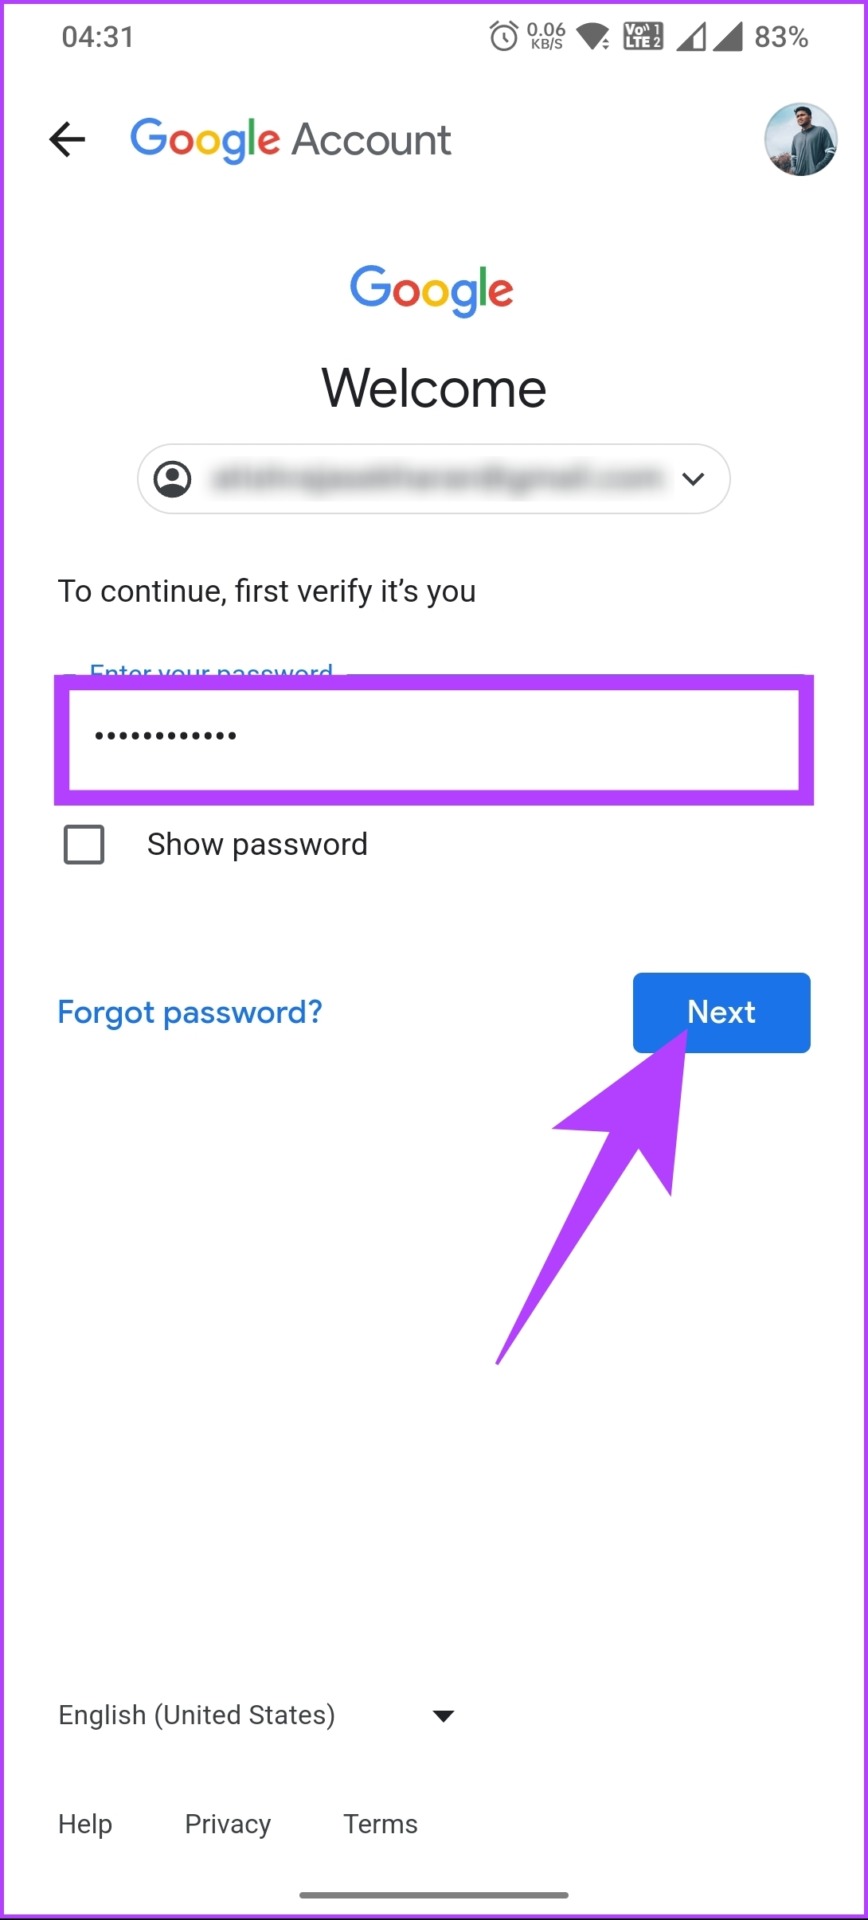 Enter your Google password and tap Next